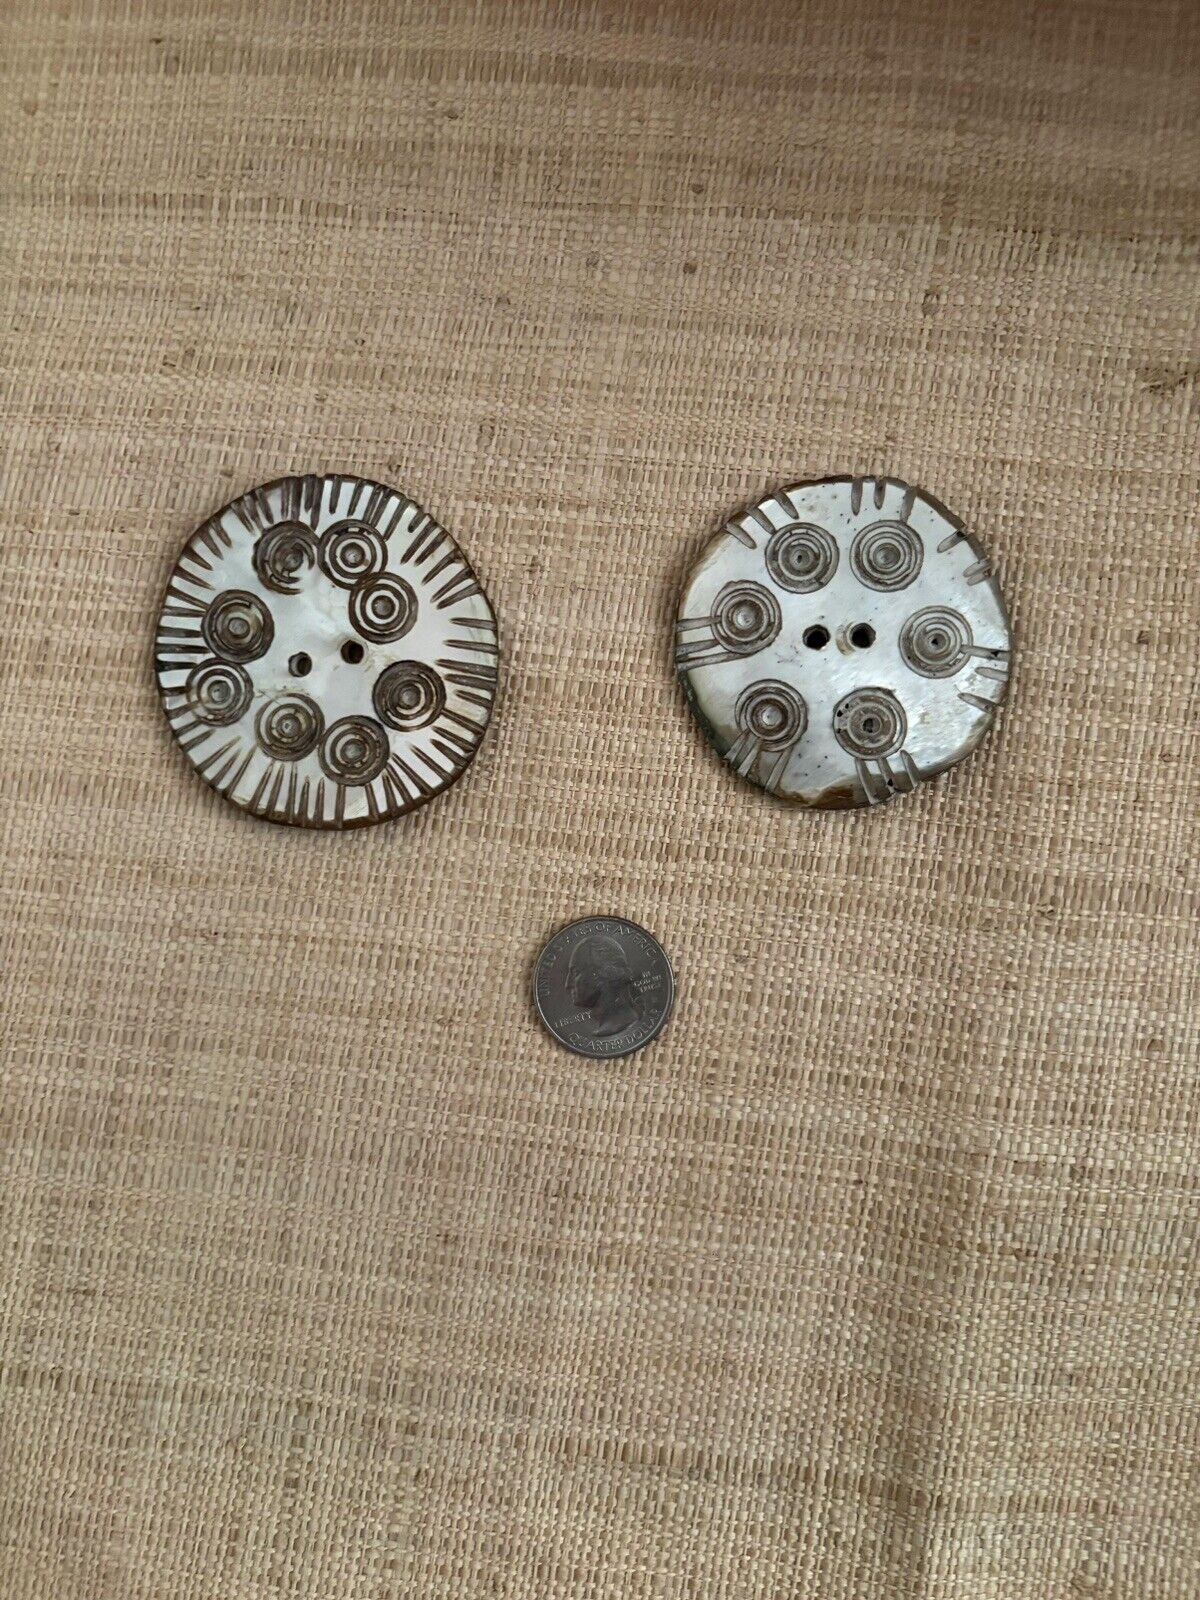 2 mother of pearl antique buttons from Pakistan